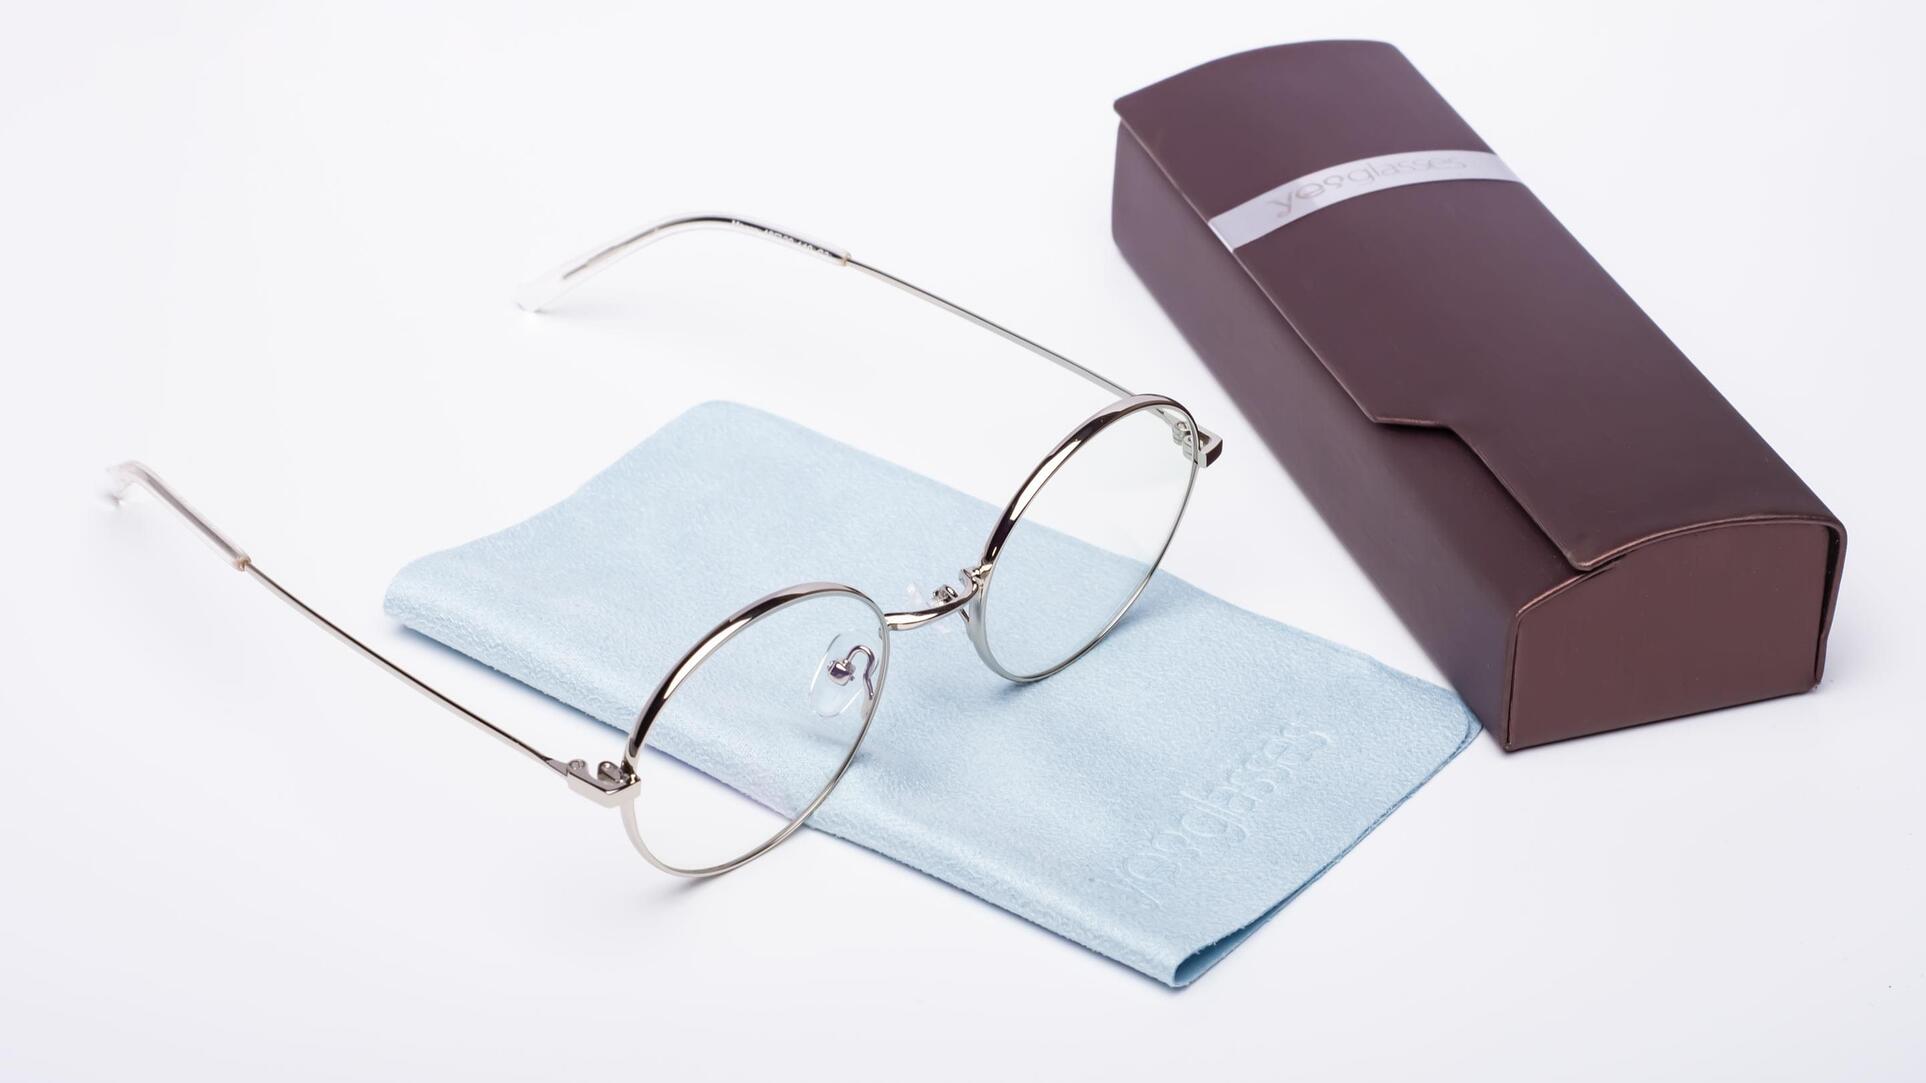 The best cloth for cleaning glasses is a microfibre cloth